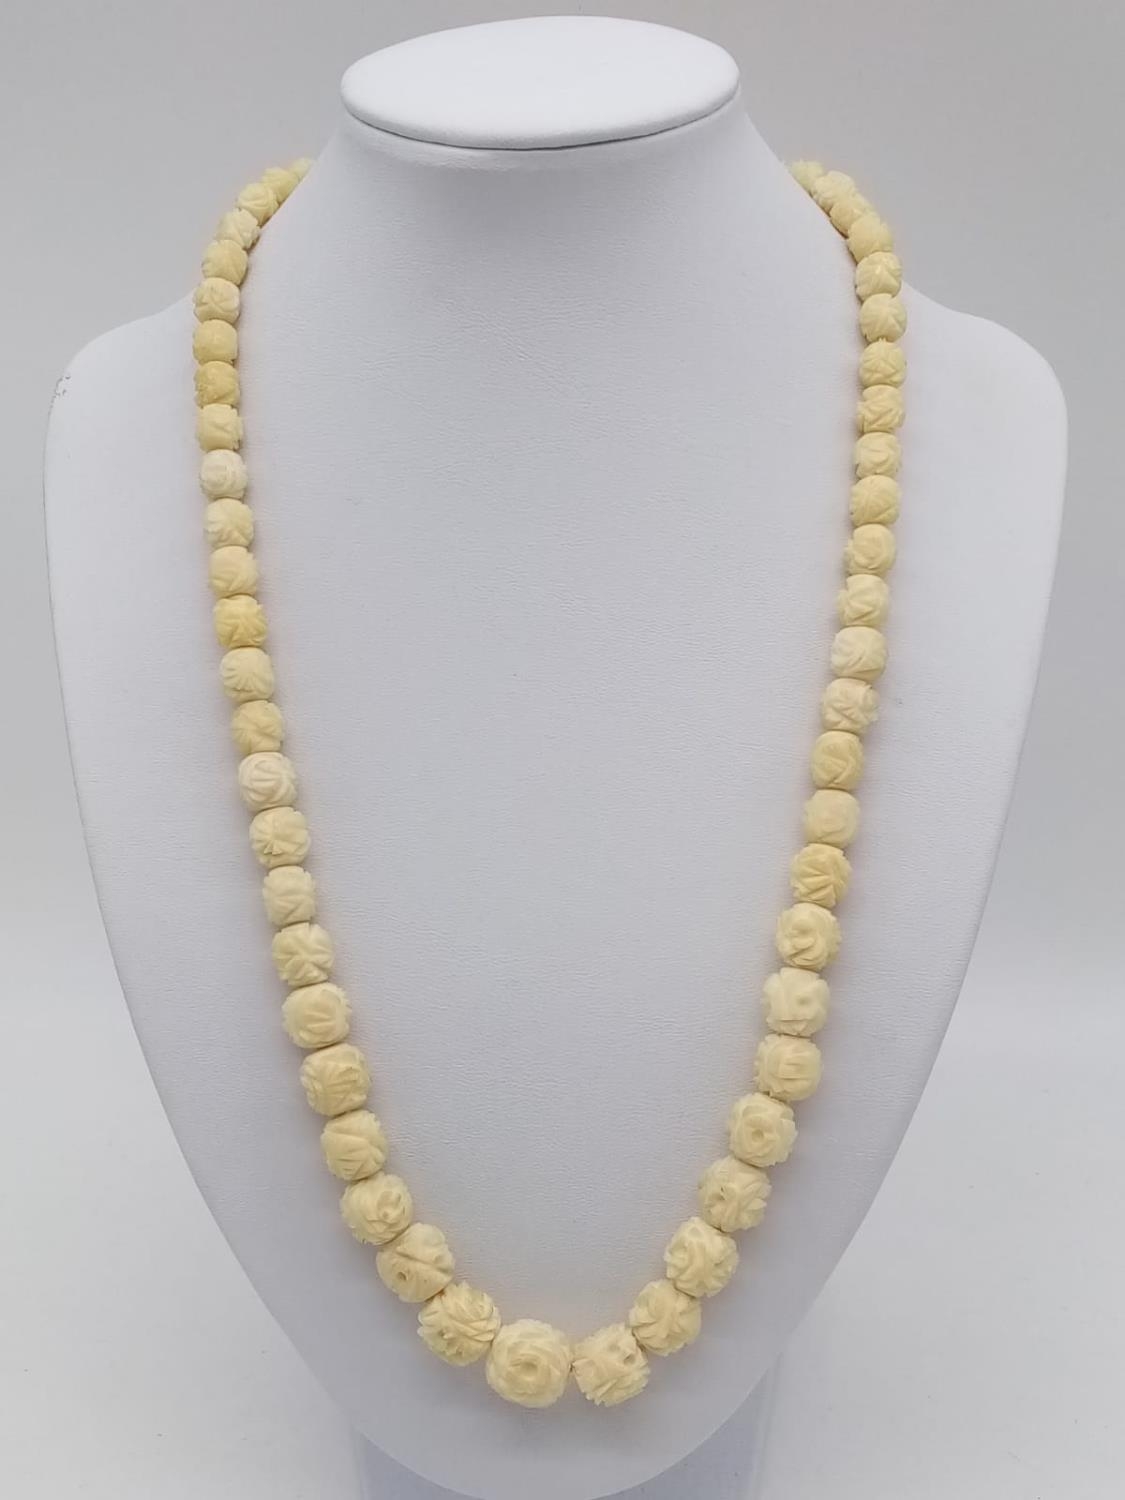 Late 19th Century hand crafted graduated ivory necklace 40.5g, 50cm long. - Image 3 of 4